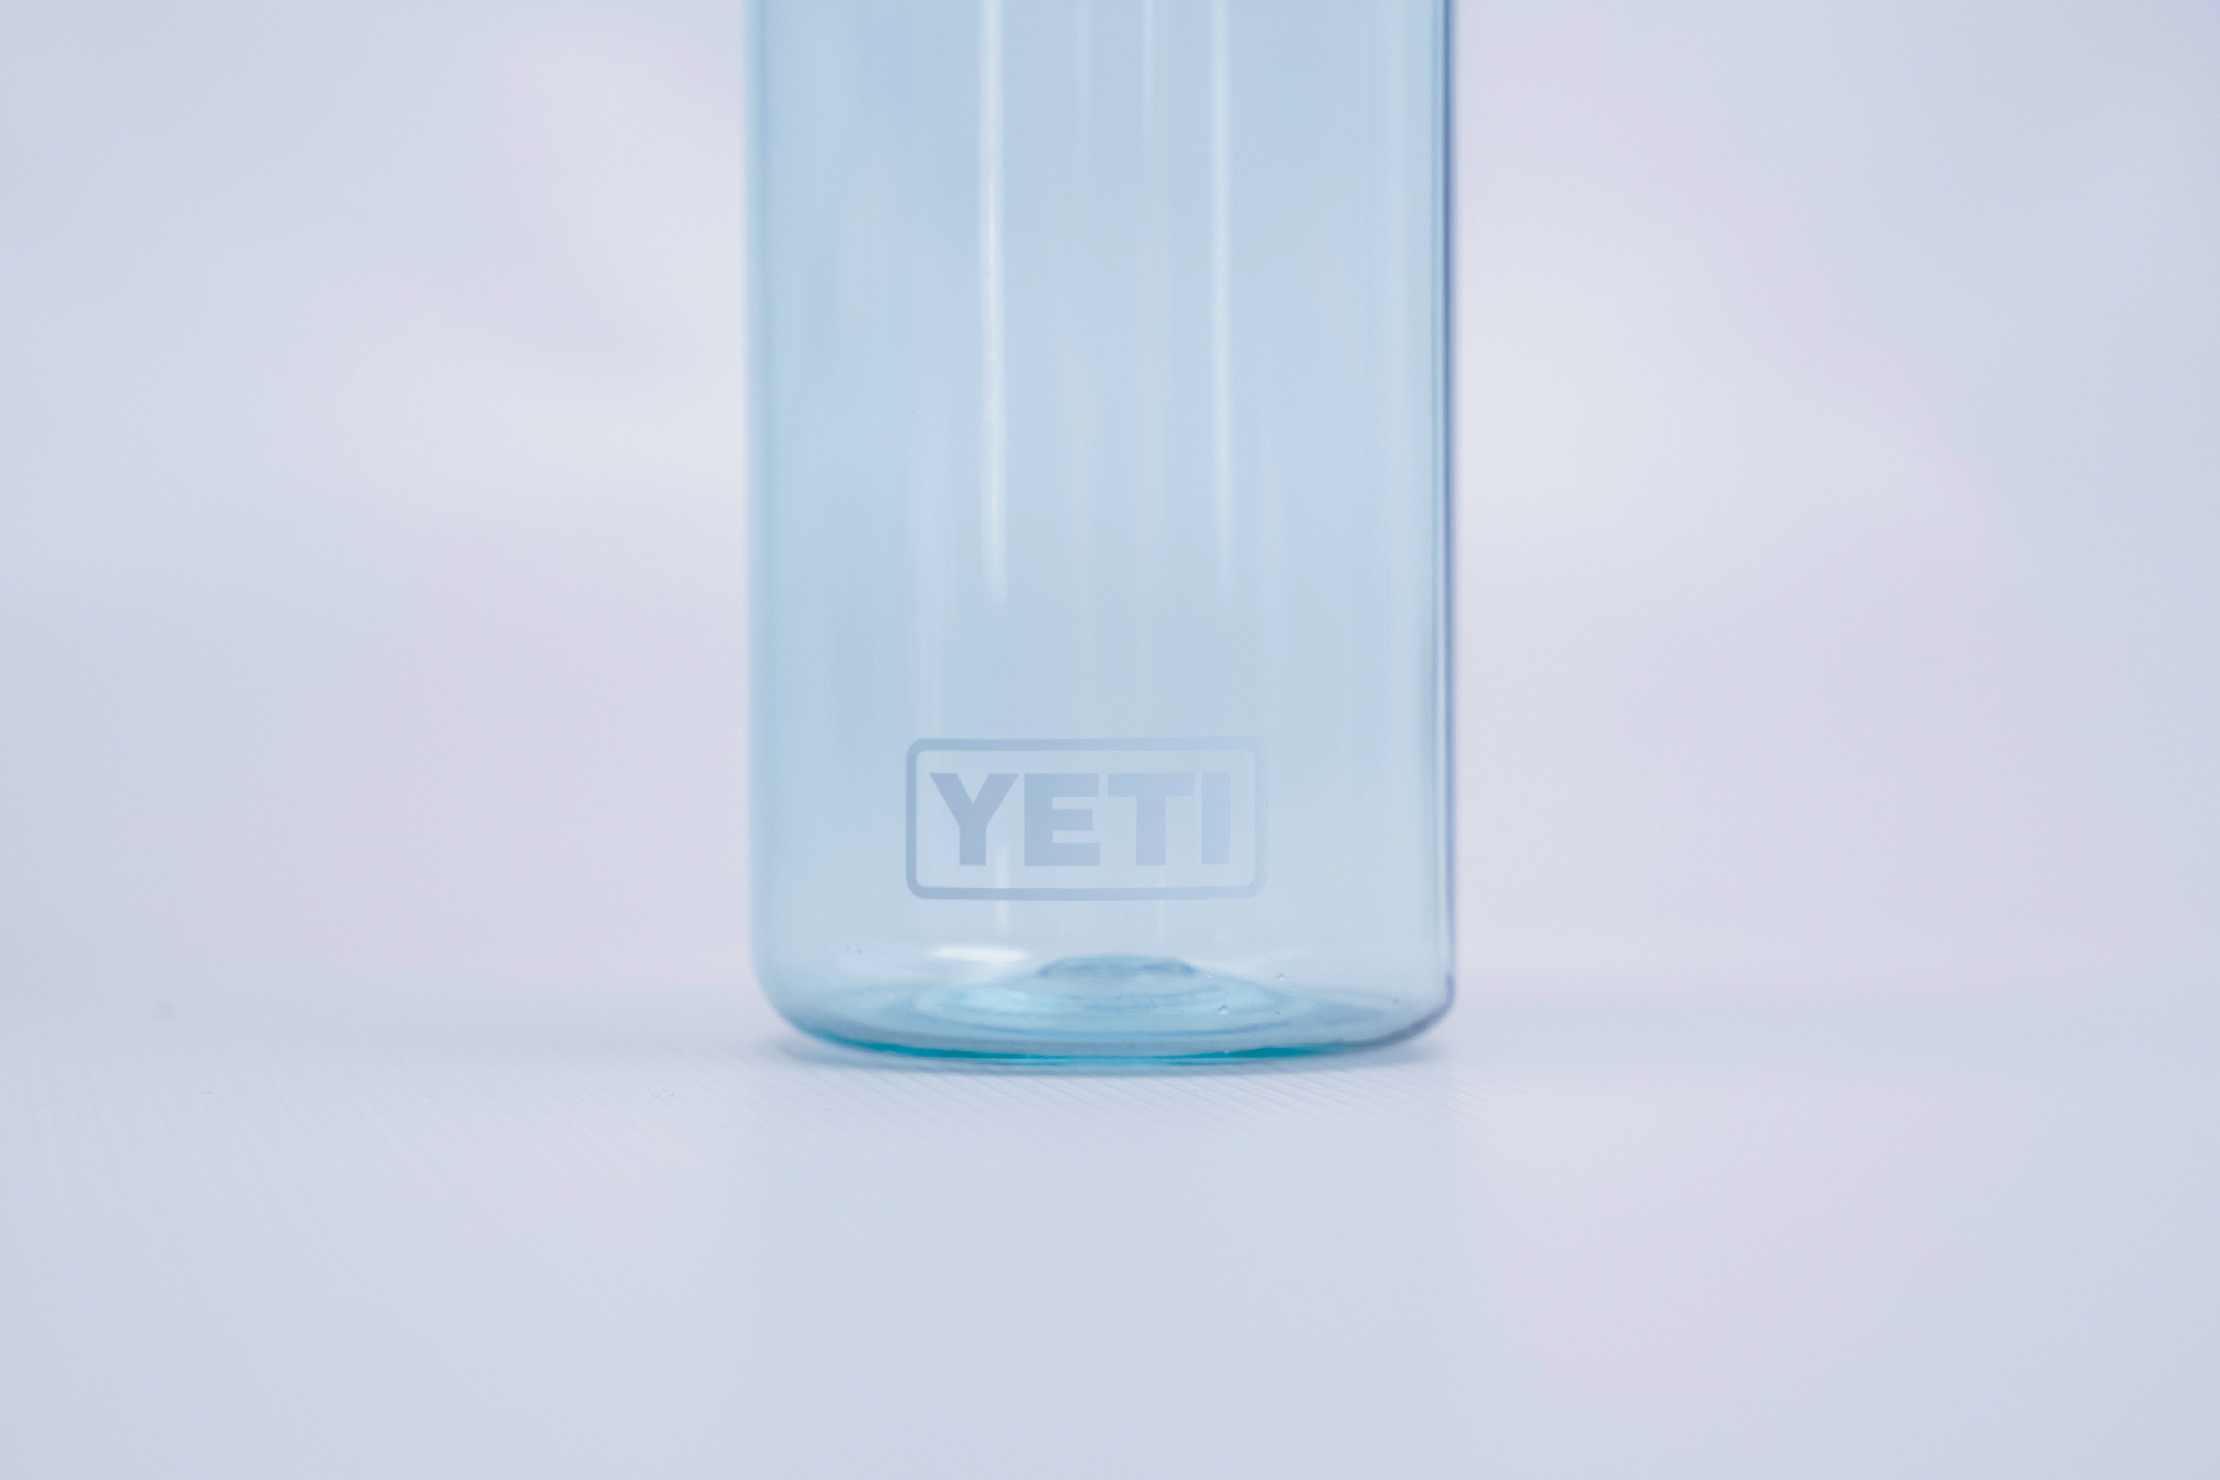 Yeti Yonder - Plastic bottles ? But, why? : r/YetiCoolers